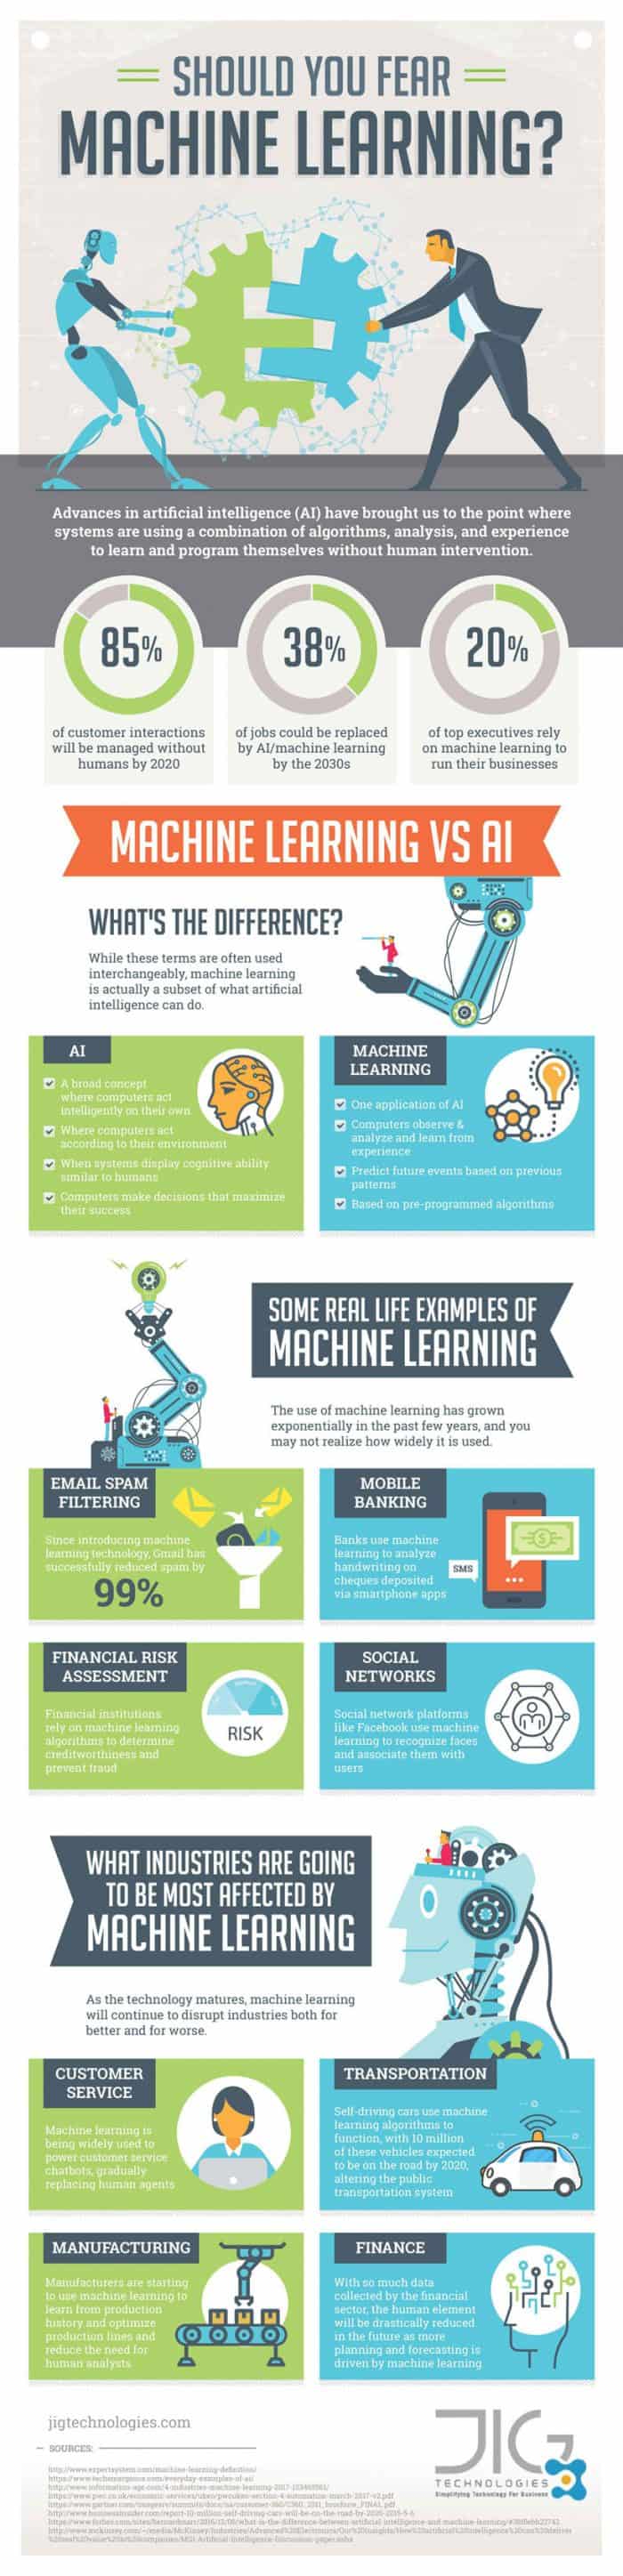 infographic explains what machine learning is and how it'll impact the future